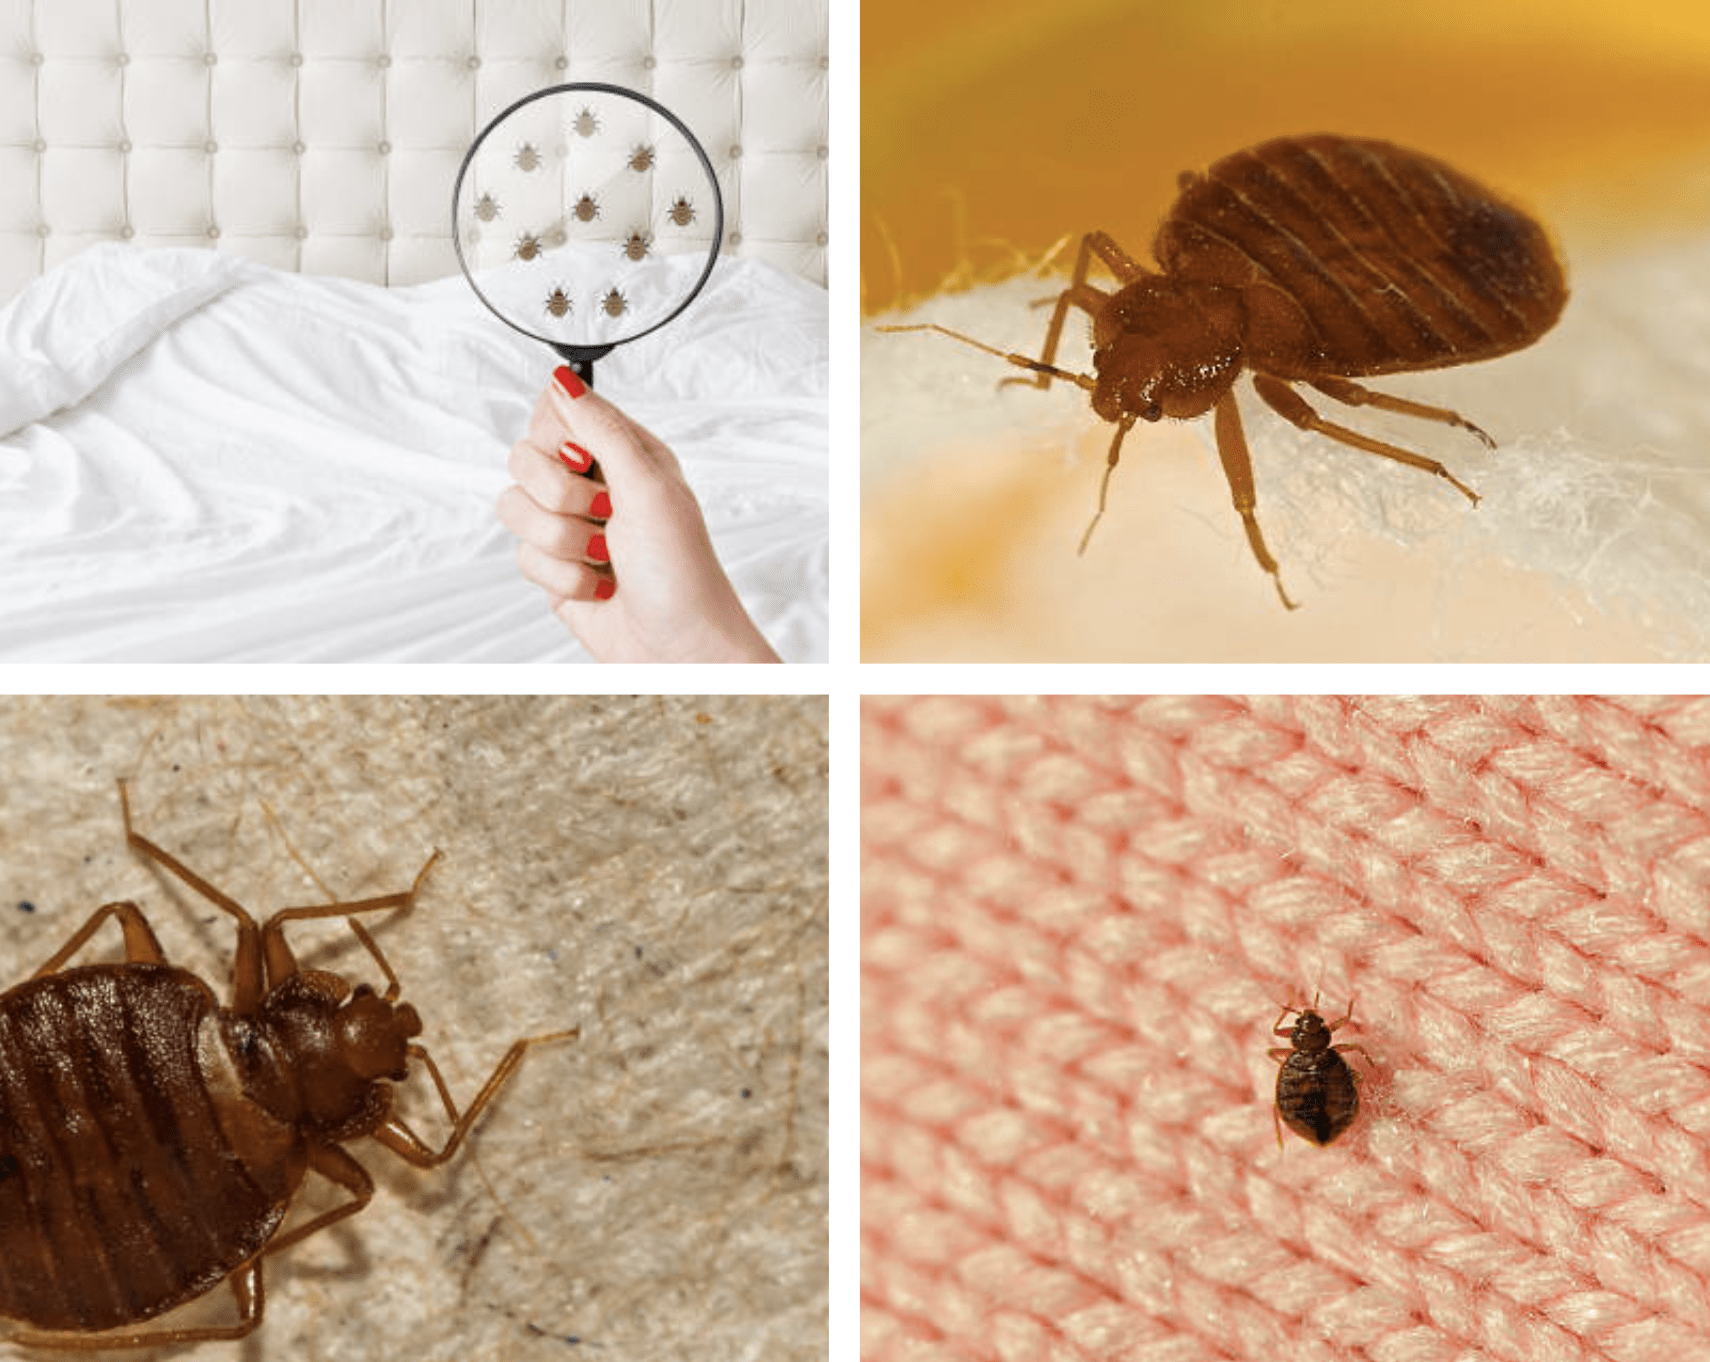 Bed bugs reported in Hopkins and what to do by Mario Villarino